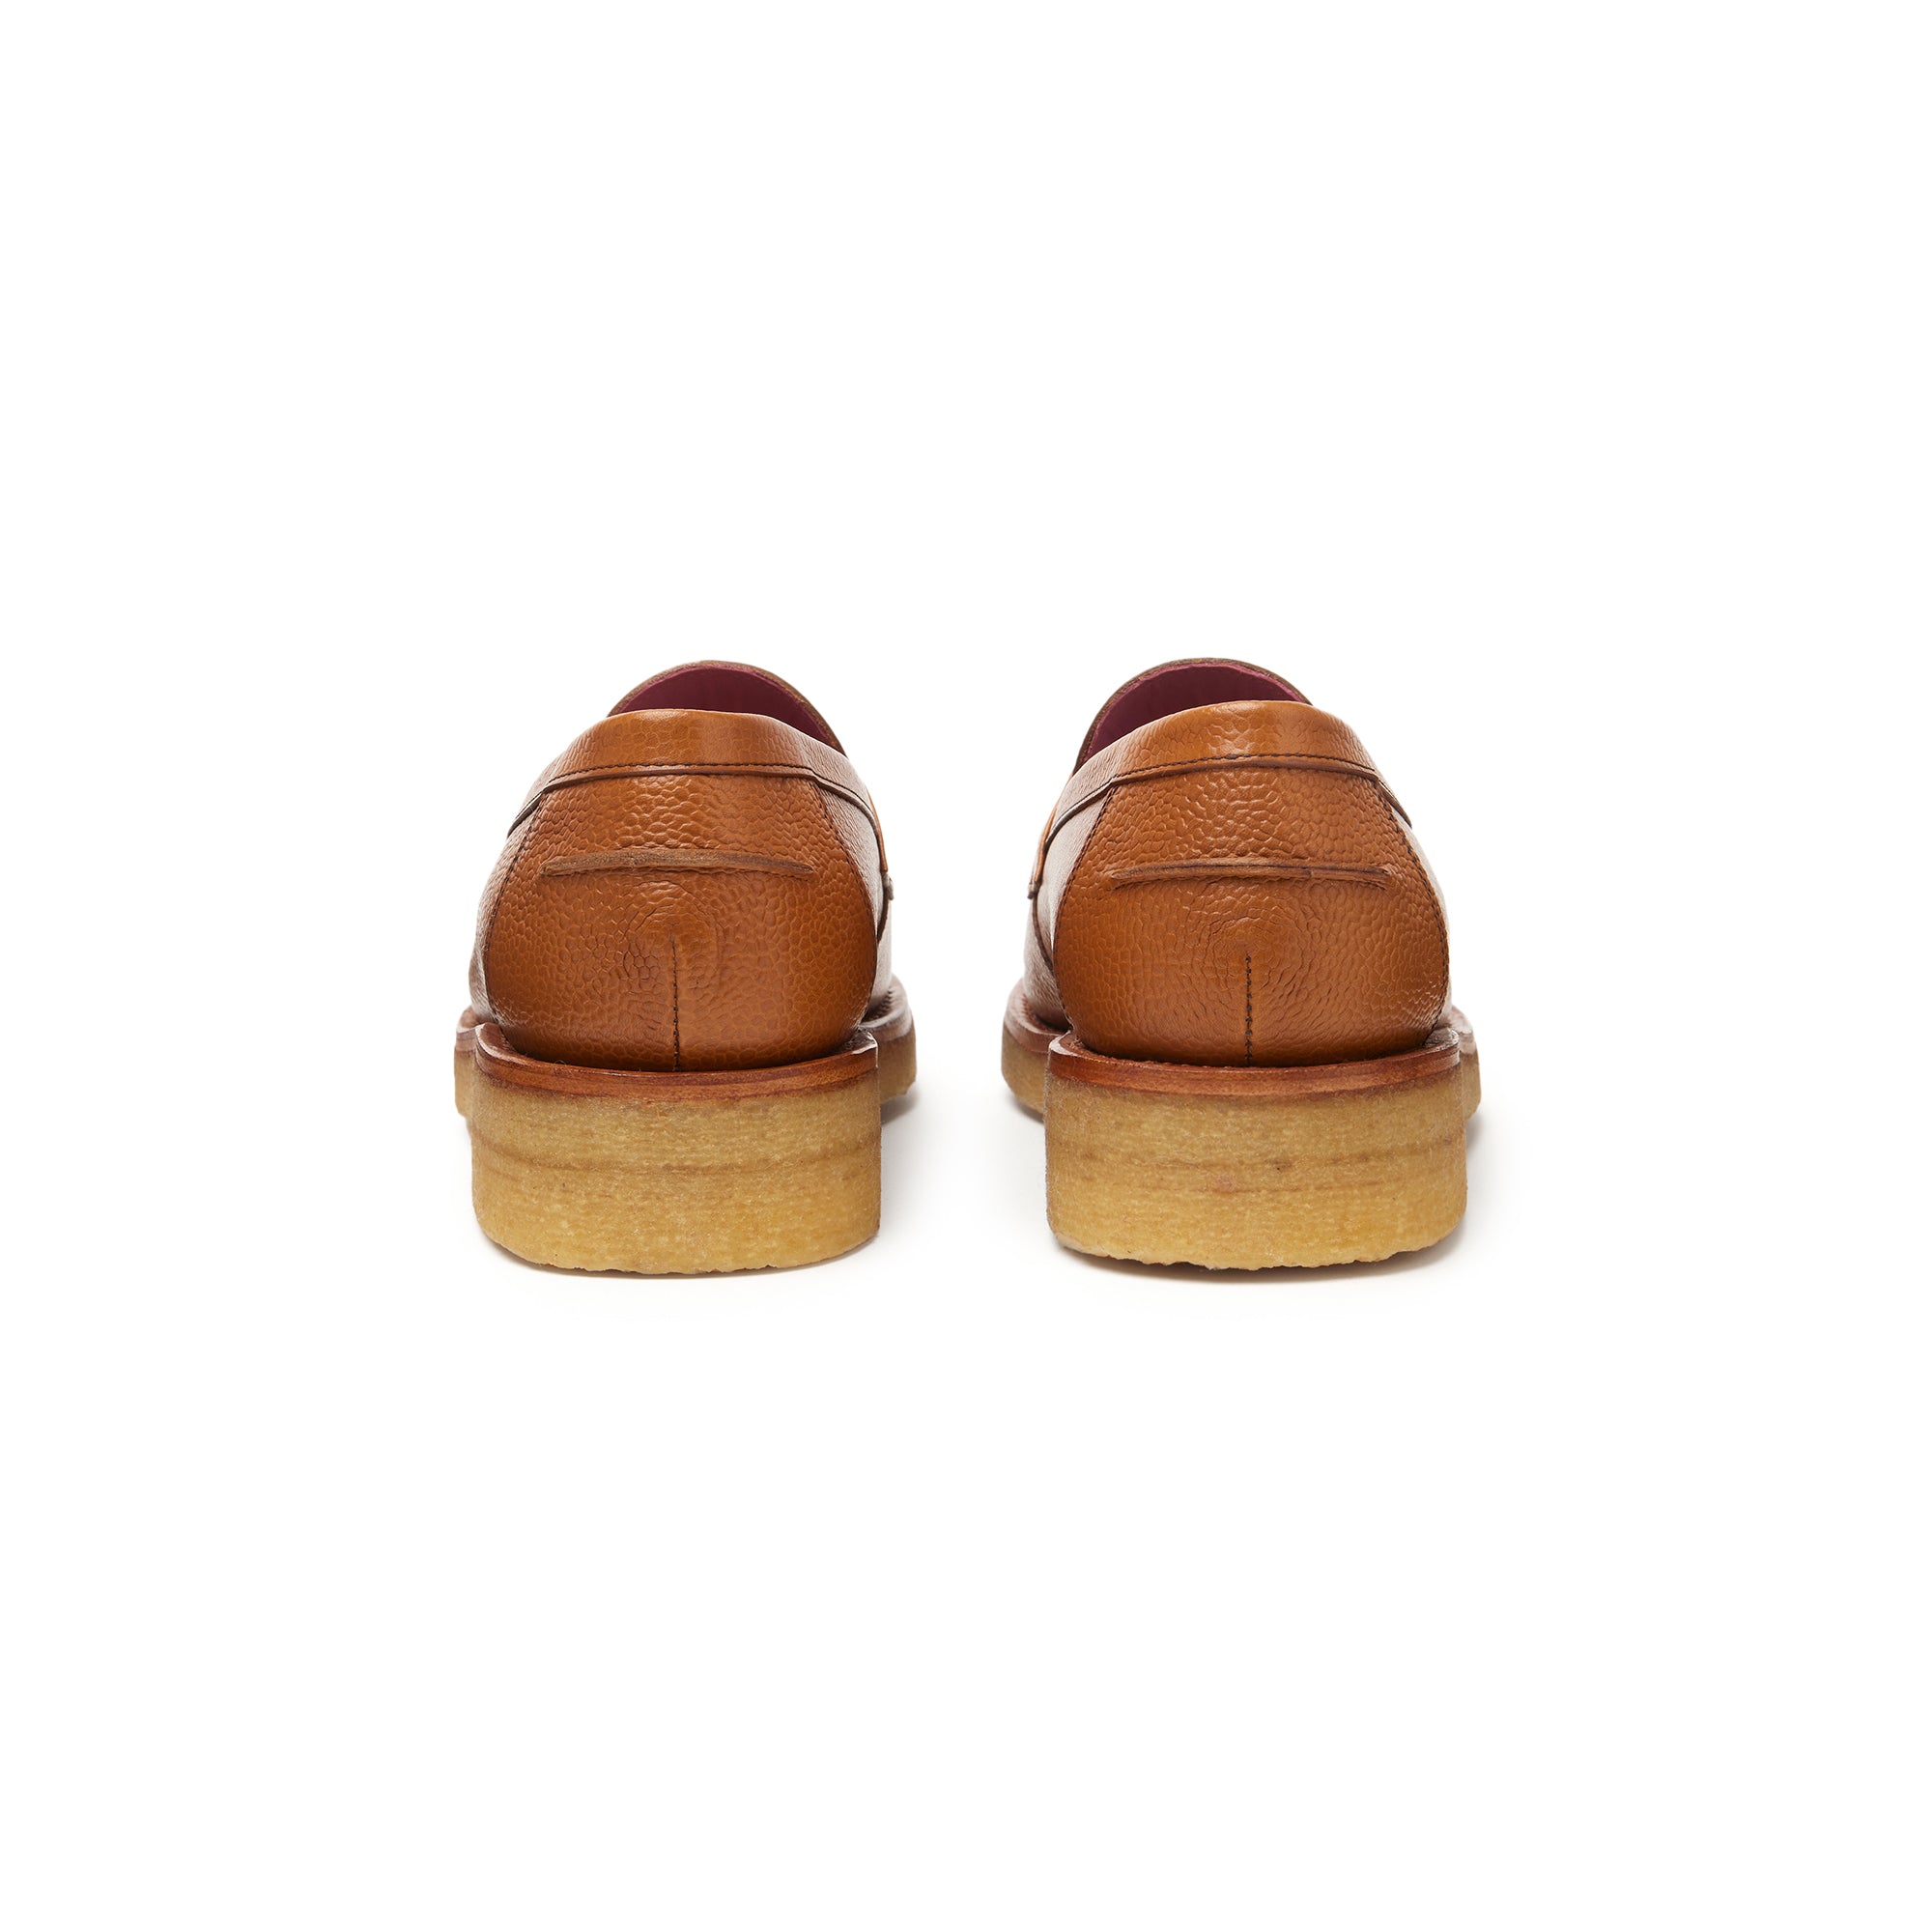 The Ellis Penny Loafer, Maple, Crepe